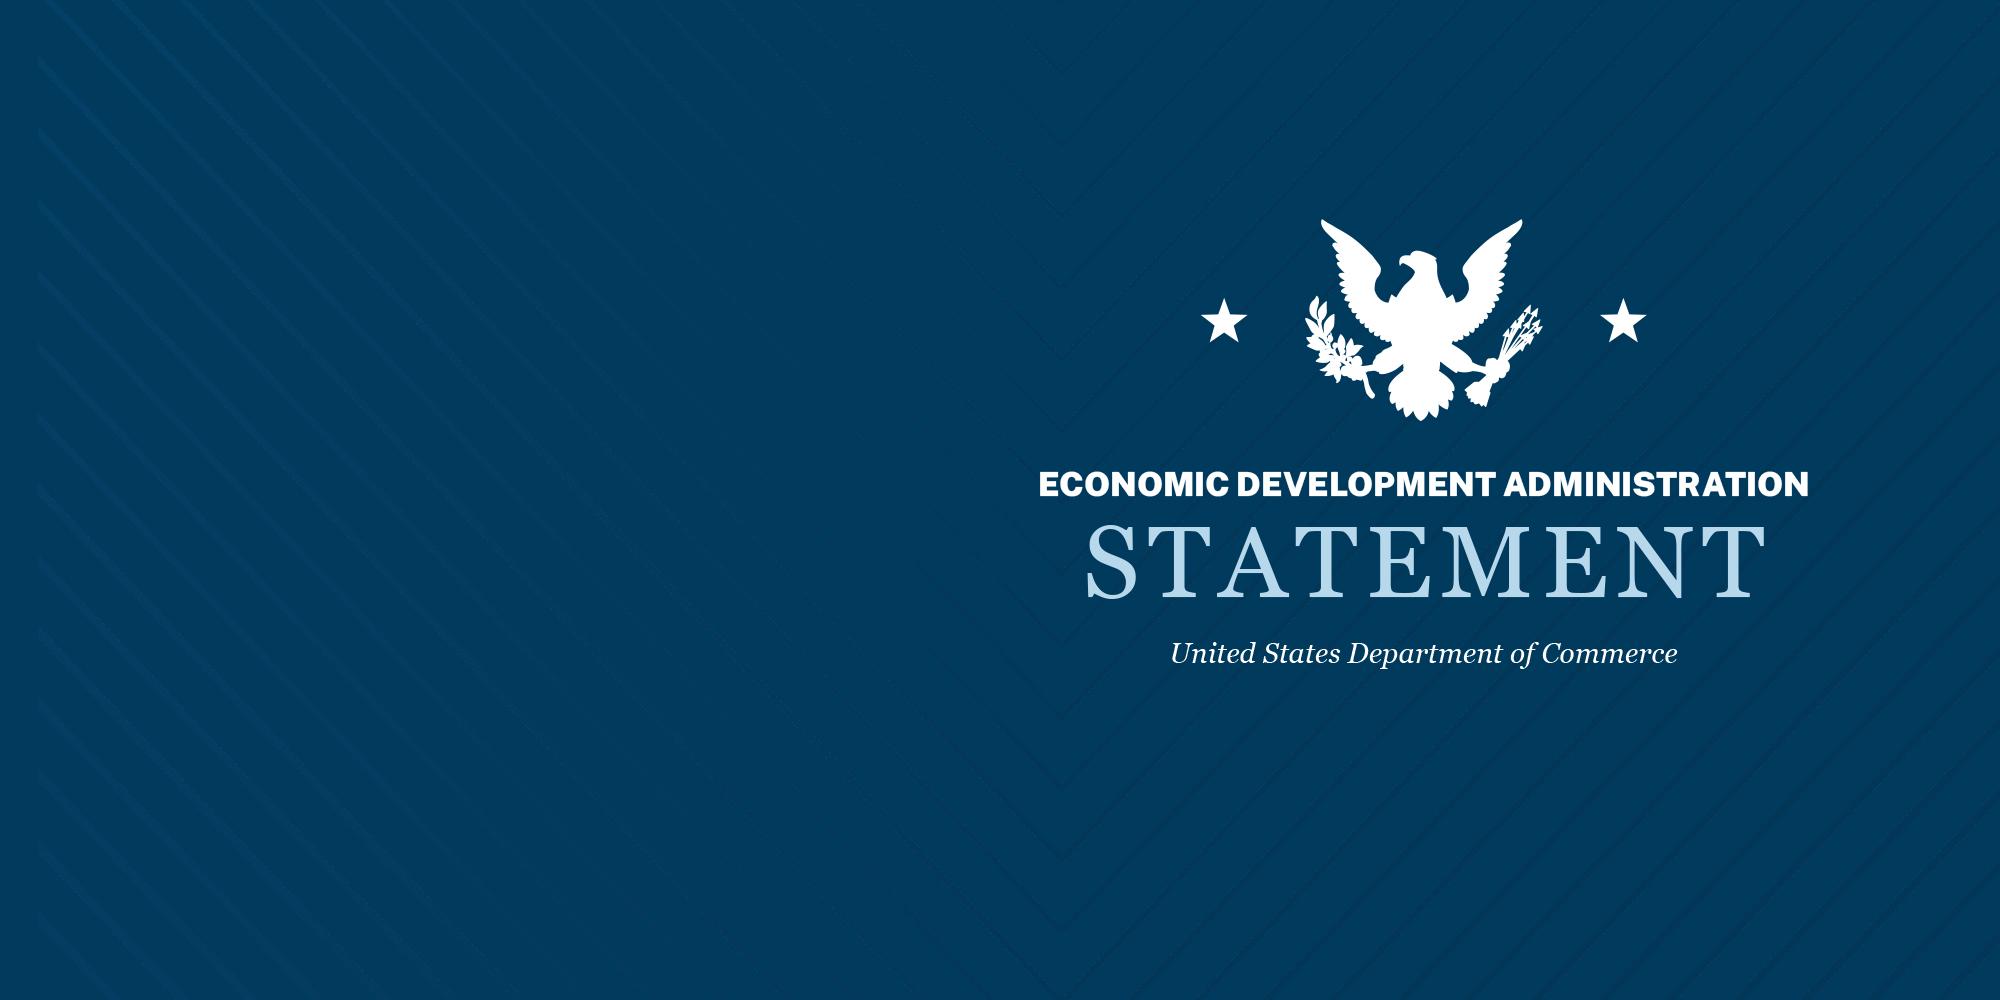 U.S. Economic Development Administration Issues Statement On Fiscal Year 2023 Appropriation